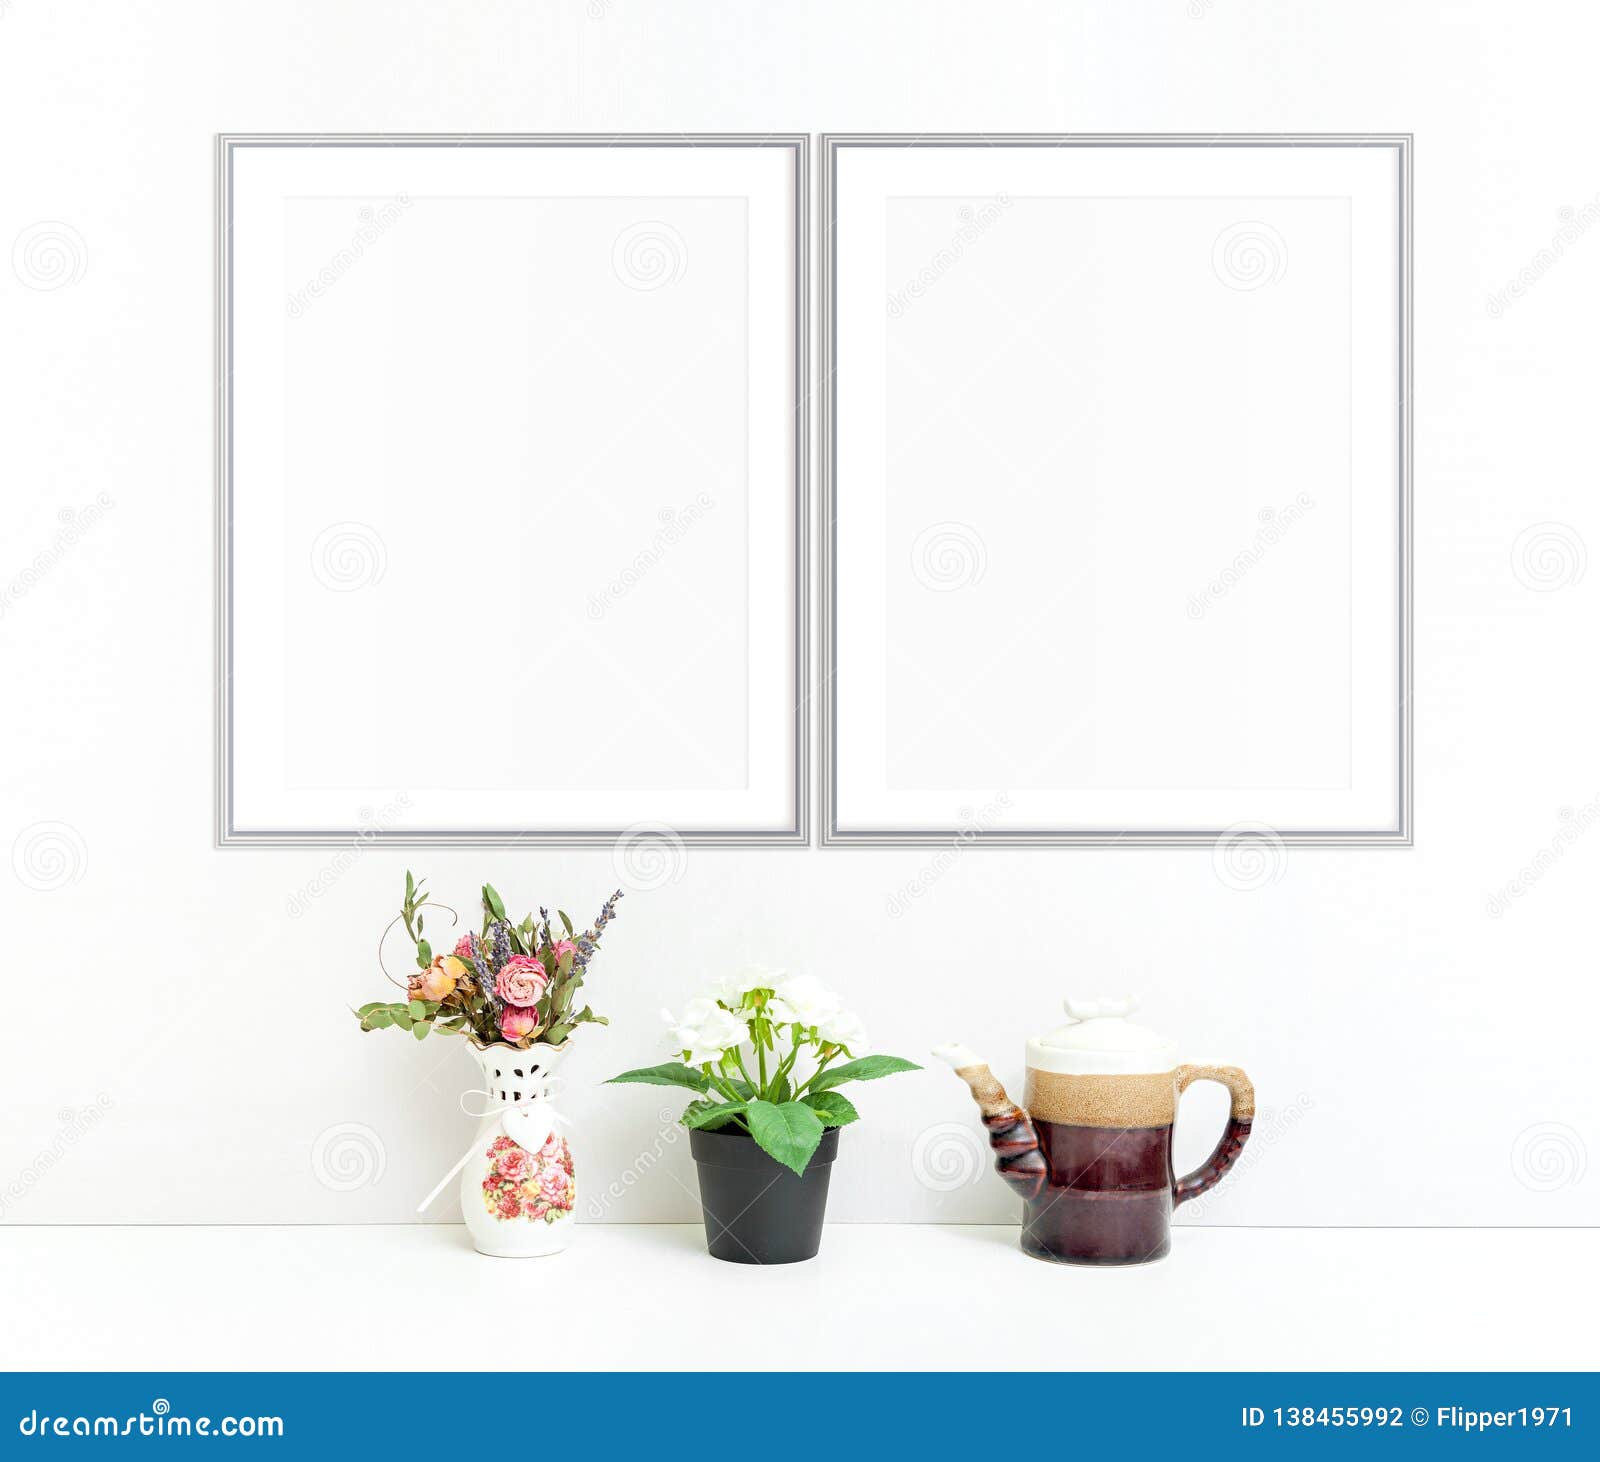 Download 8x10 16x20 Set Of Two Vertical Frame Mockup Stock Photo Image Of Showcase Decor 138455992